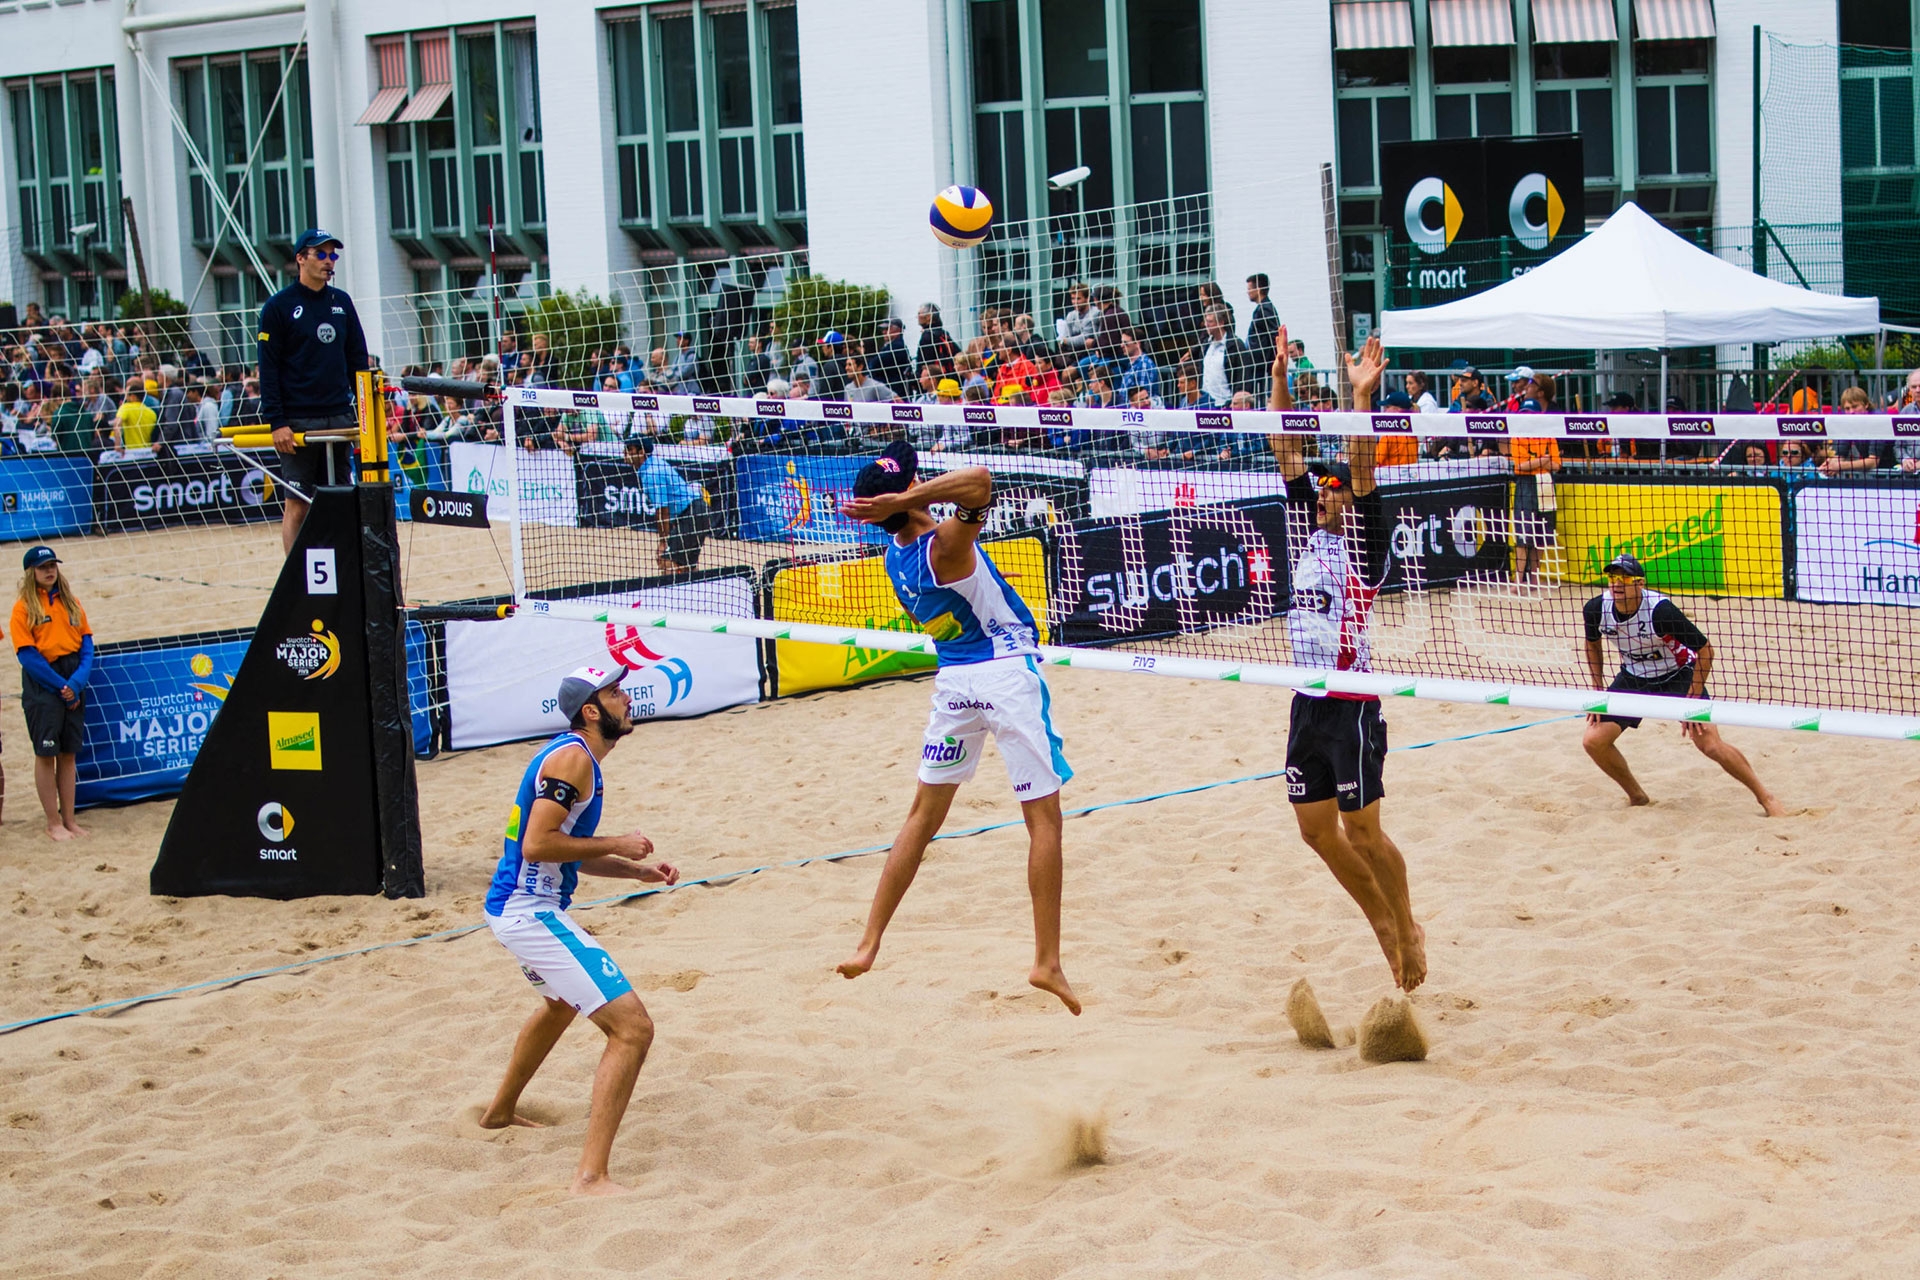 Italy are sure to have their fans on Center Court at 3pm when Nicolai/Lupo take to the sand. Photocredit: Daniel Grund.